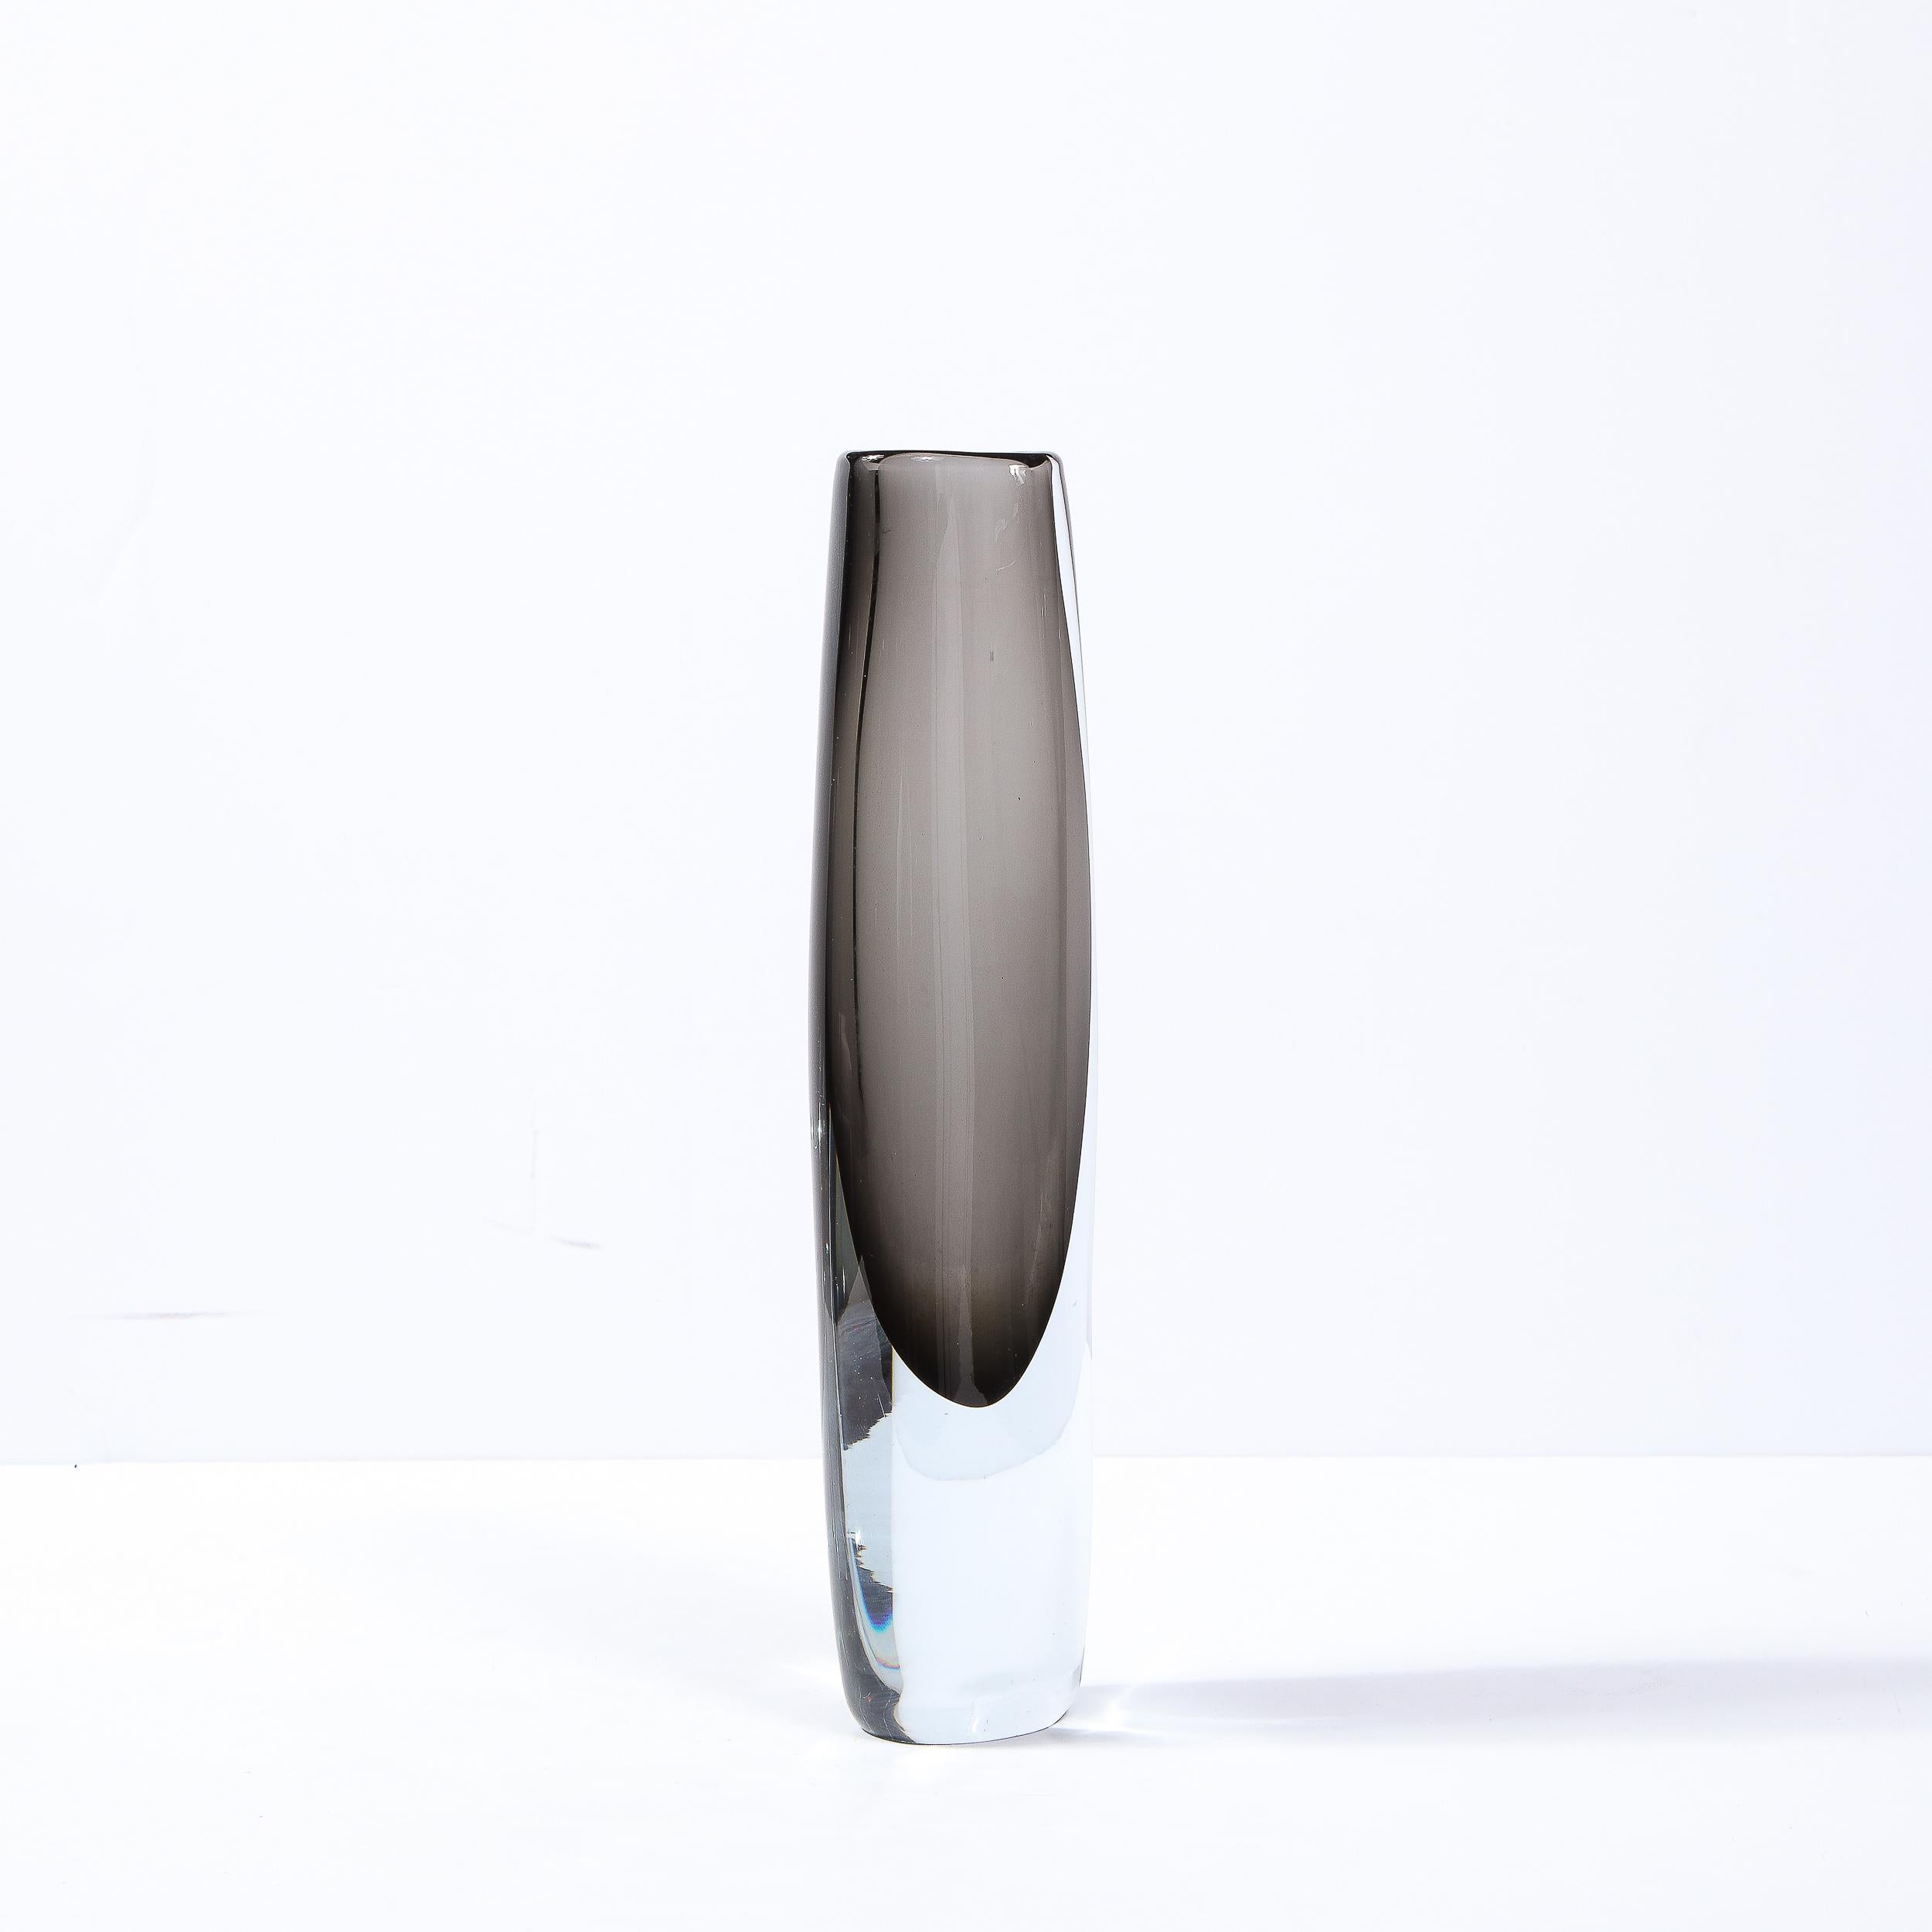 This stunning Mid-Century Modern vase was realized by the esteemed maker Holmegaard in Sweden circa 1960. It features a dynamic, subtly asymmetrical cylindrical body with an amorphic teardrop center in sultry smoked gray glass surrounded by